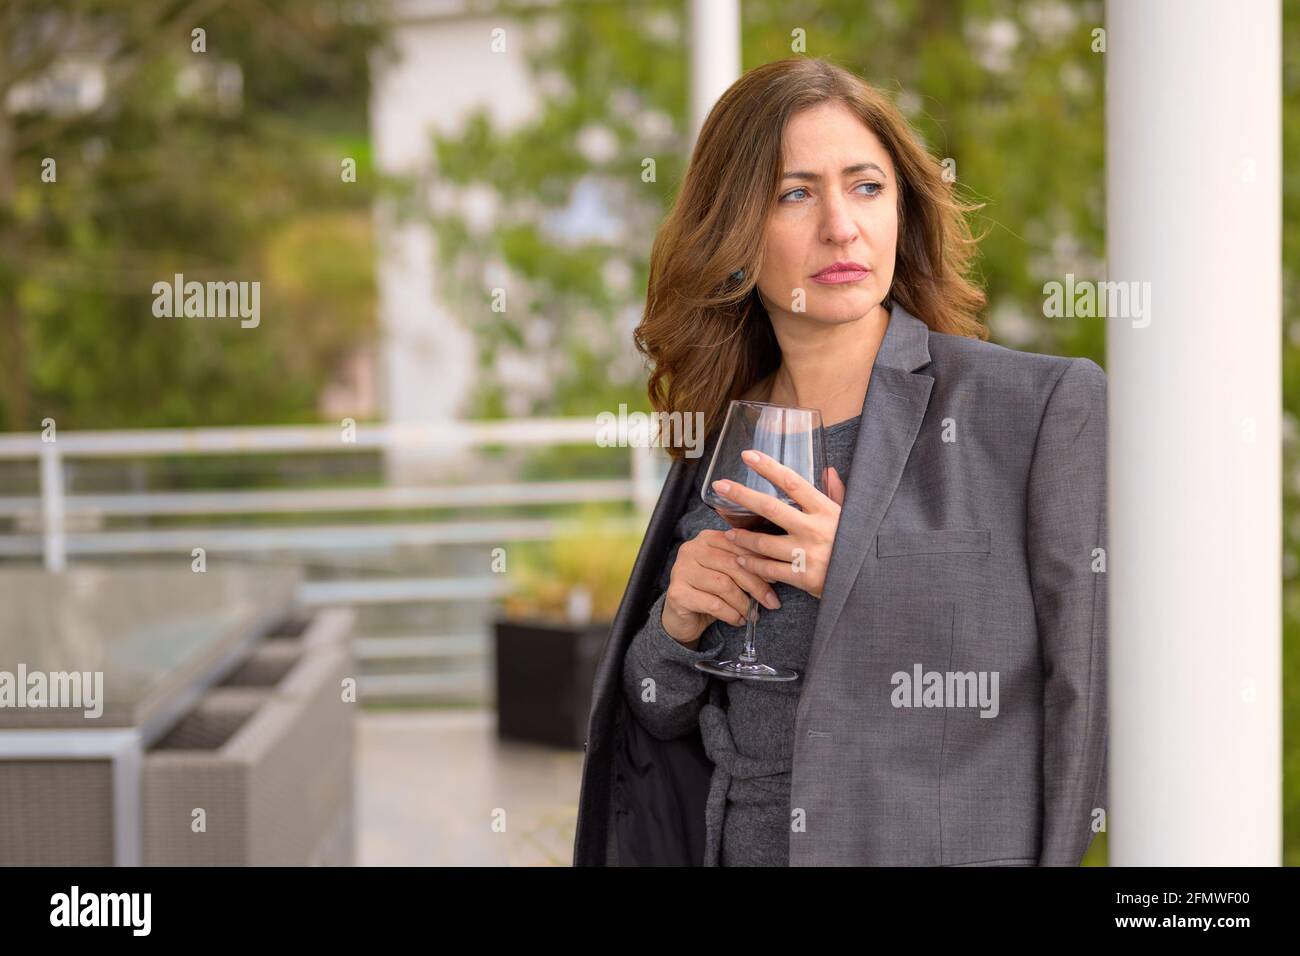 Woman relaxing on a balcony with a glass of wine standing leaning against therailing with a jacket draped over her shoulders looking pensively aside Stock Photo